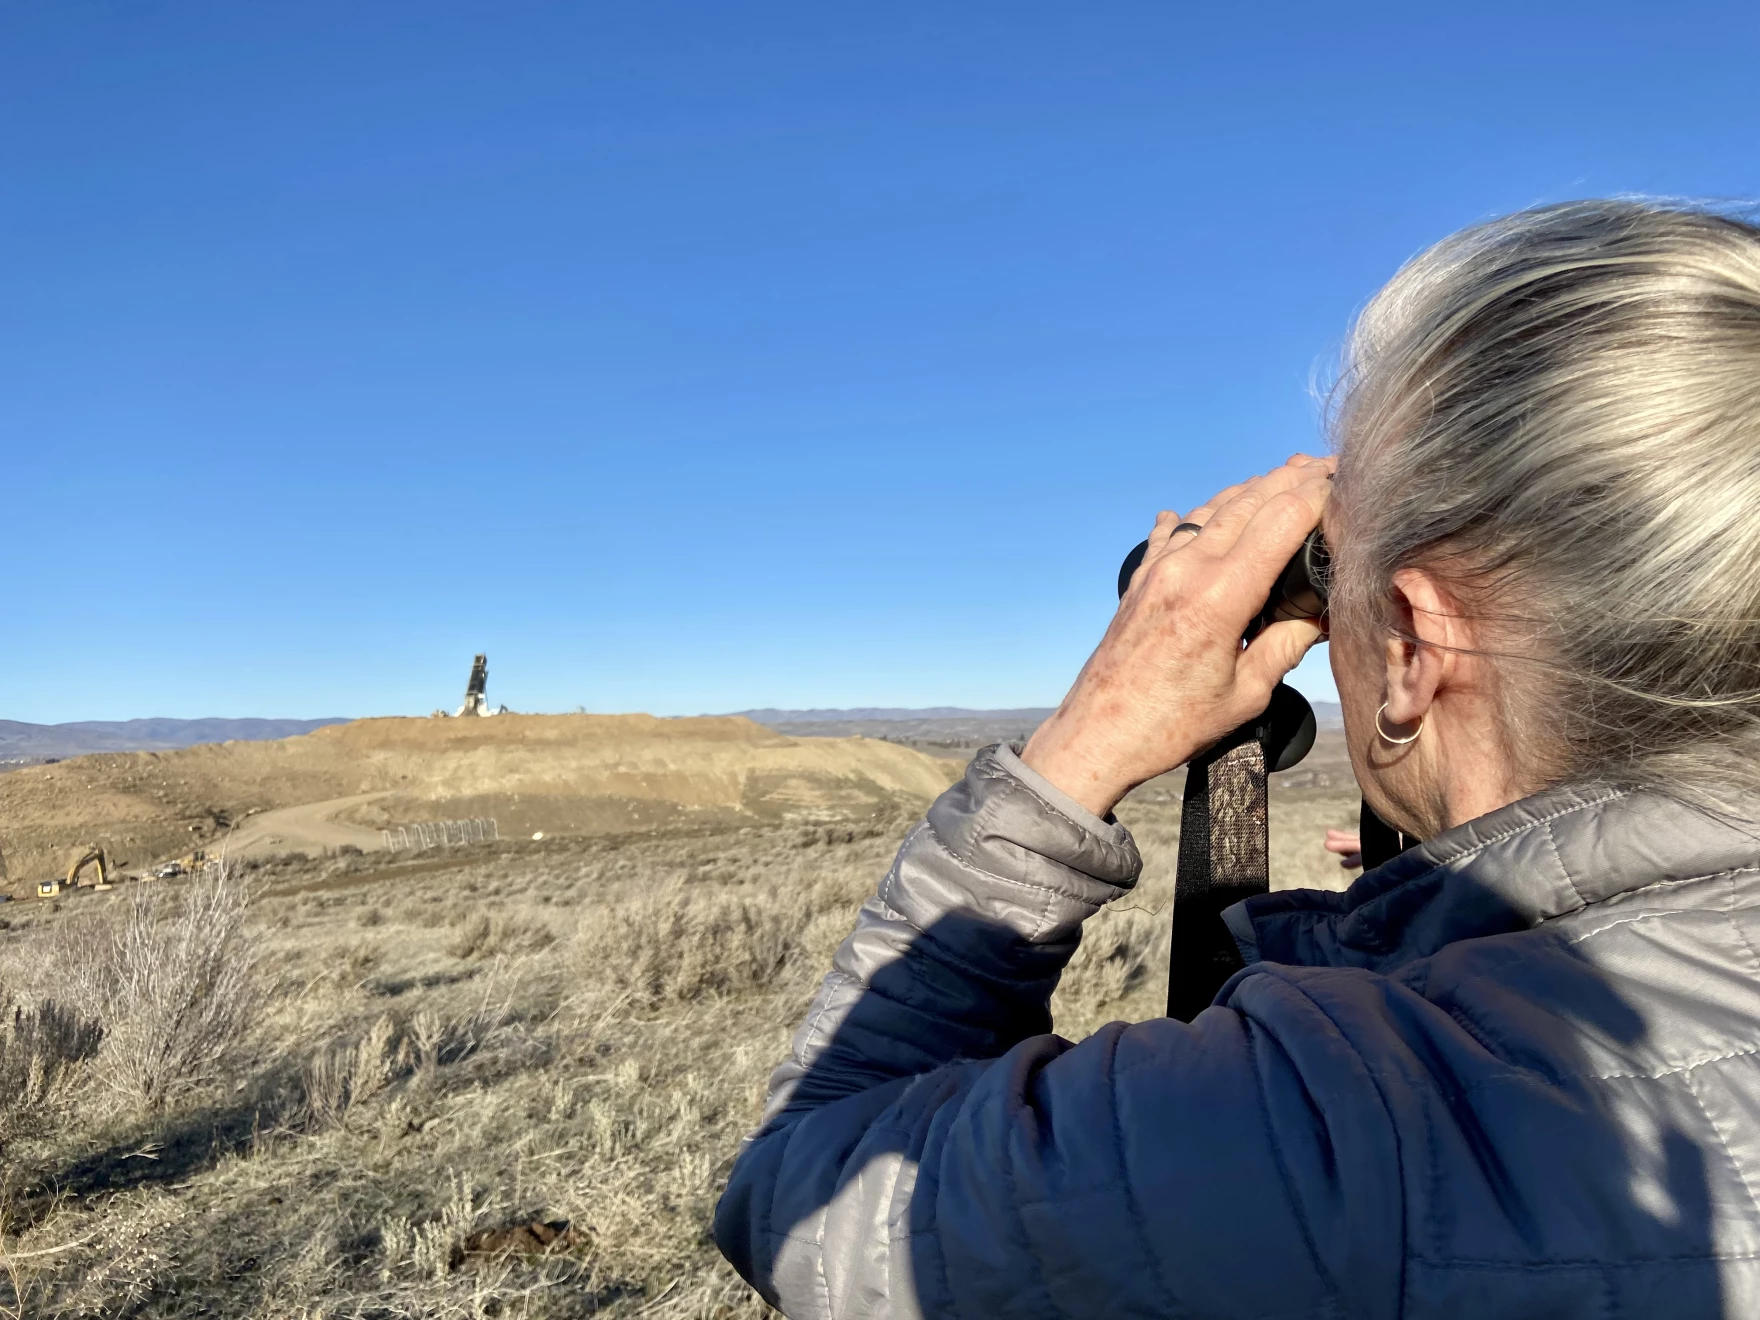 While hiking, Nancy Lust, with Friends of Rocky Top, watches a truck dump waste into a landfill in Yakima County. Lust lives near the landfill and has fought to learn more about what's getting disposed of near her home.